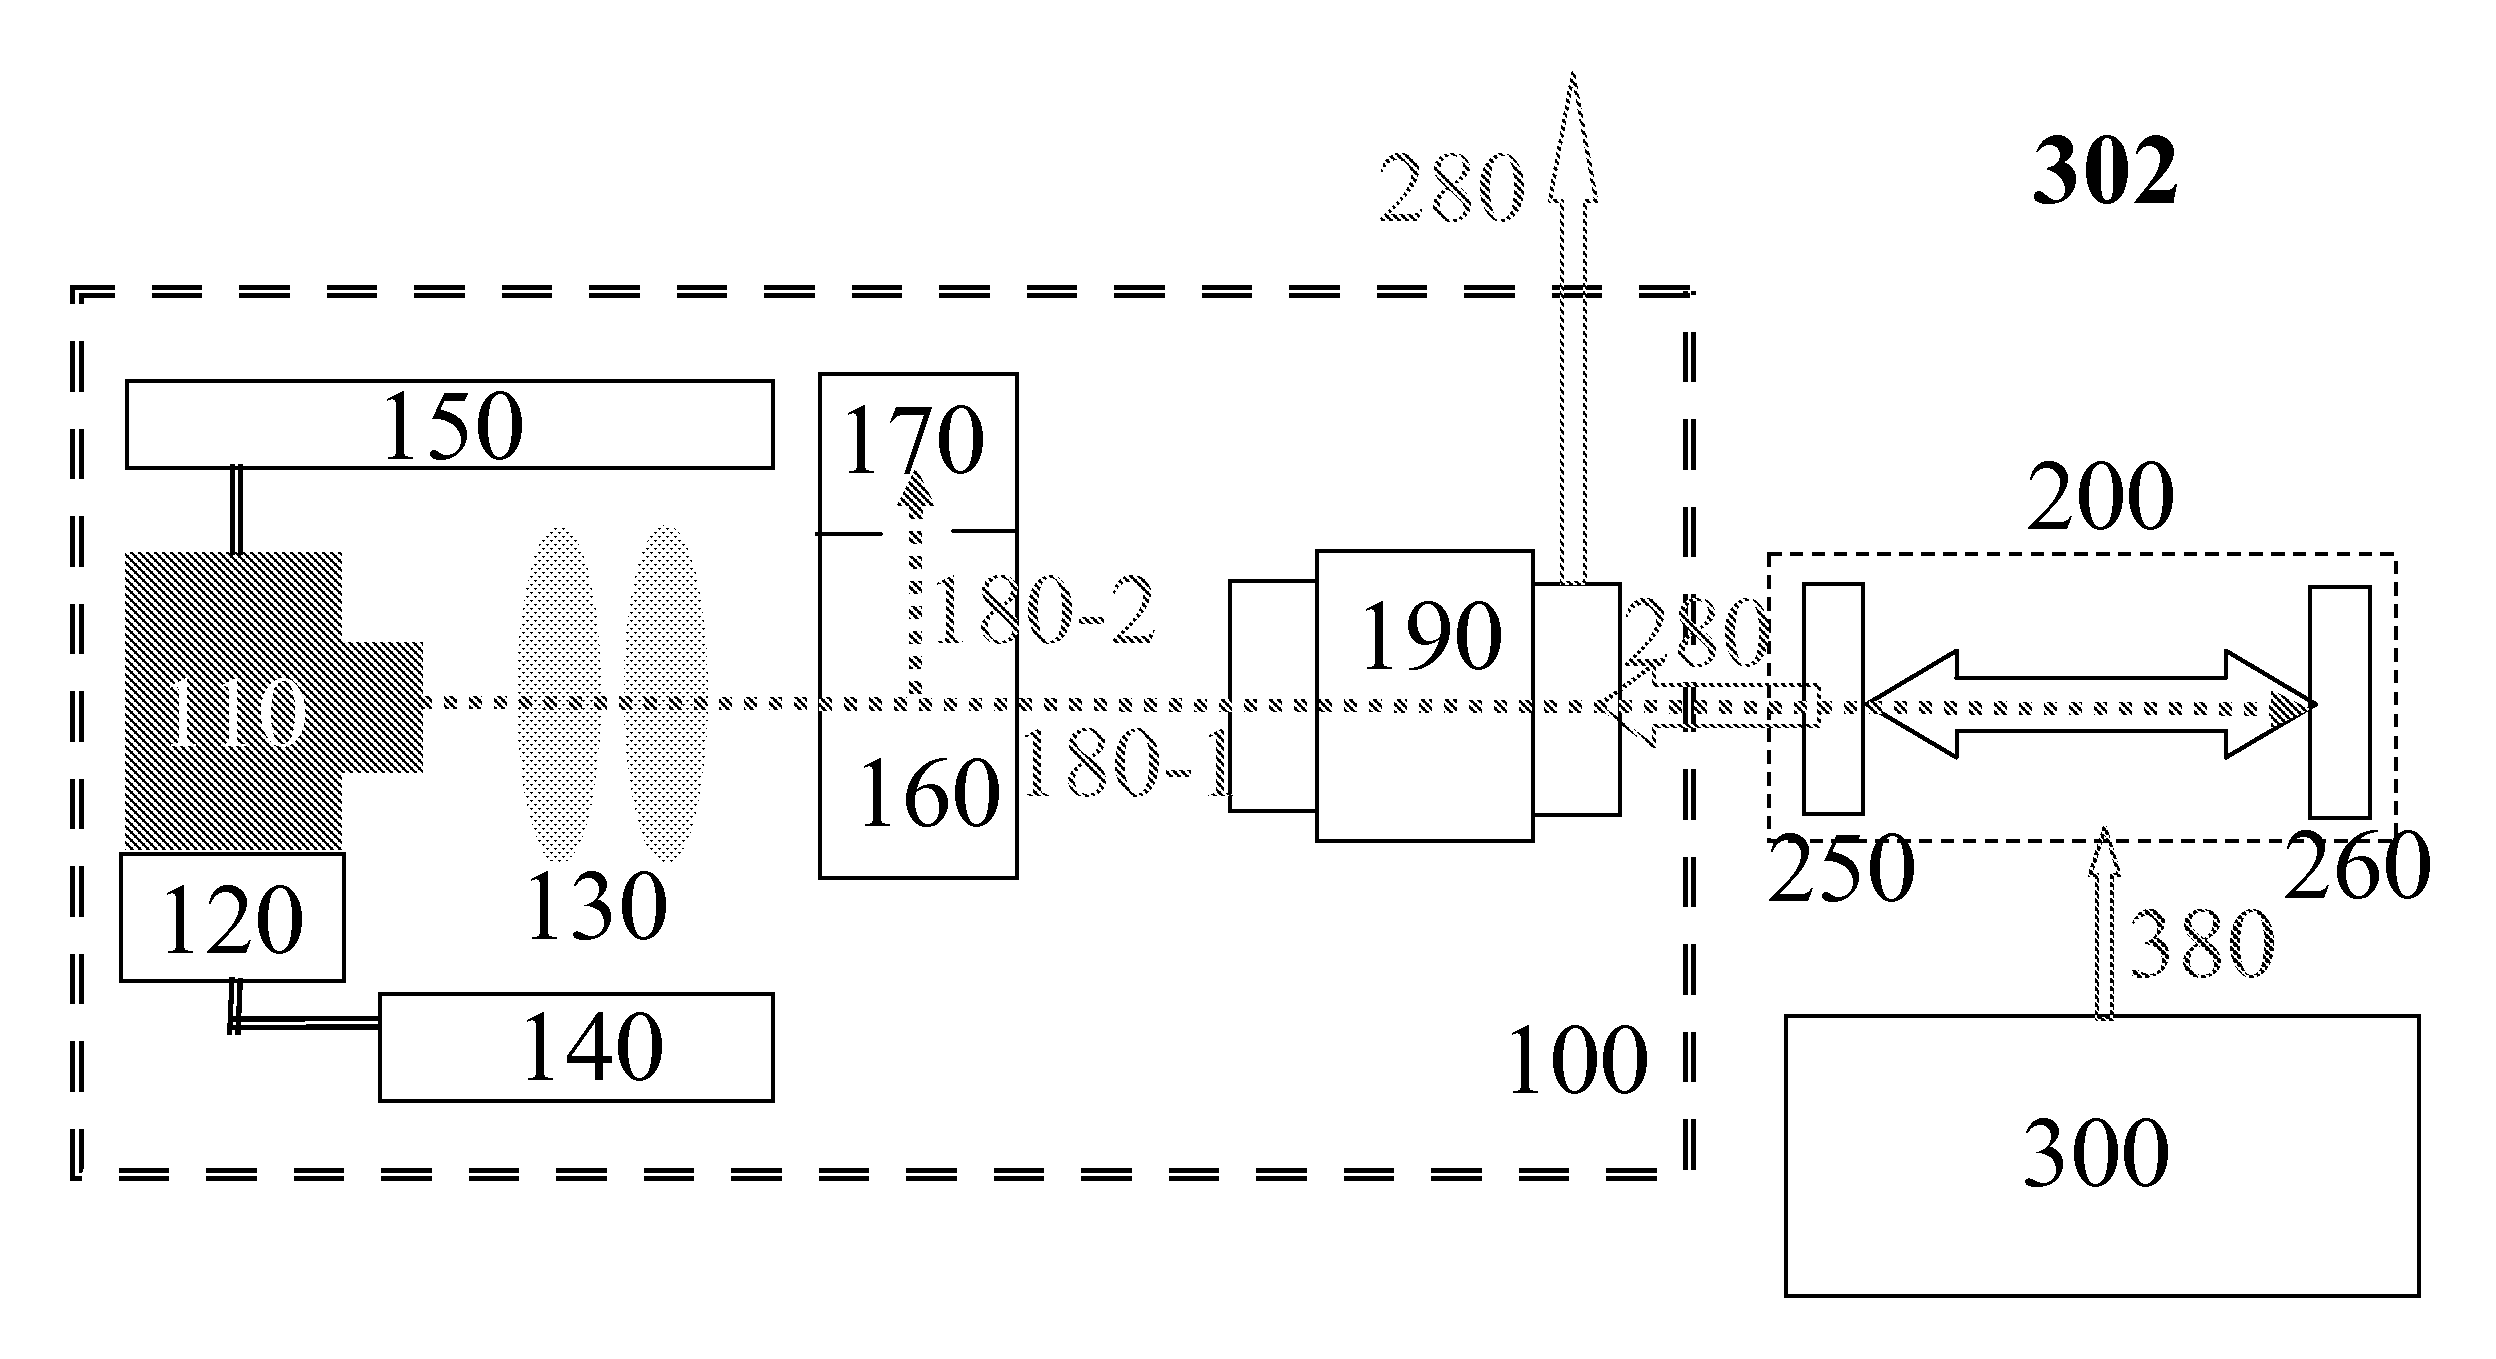 Self-contained module for injecting signal into slave laser without any modifications or adaptations to it